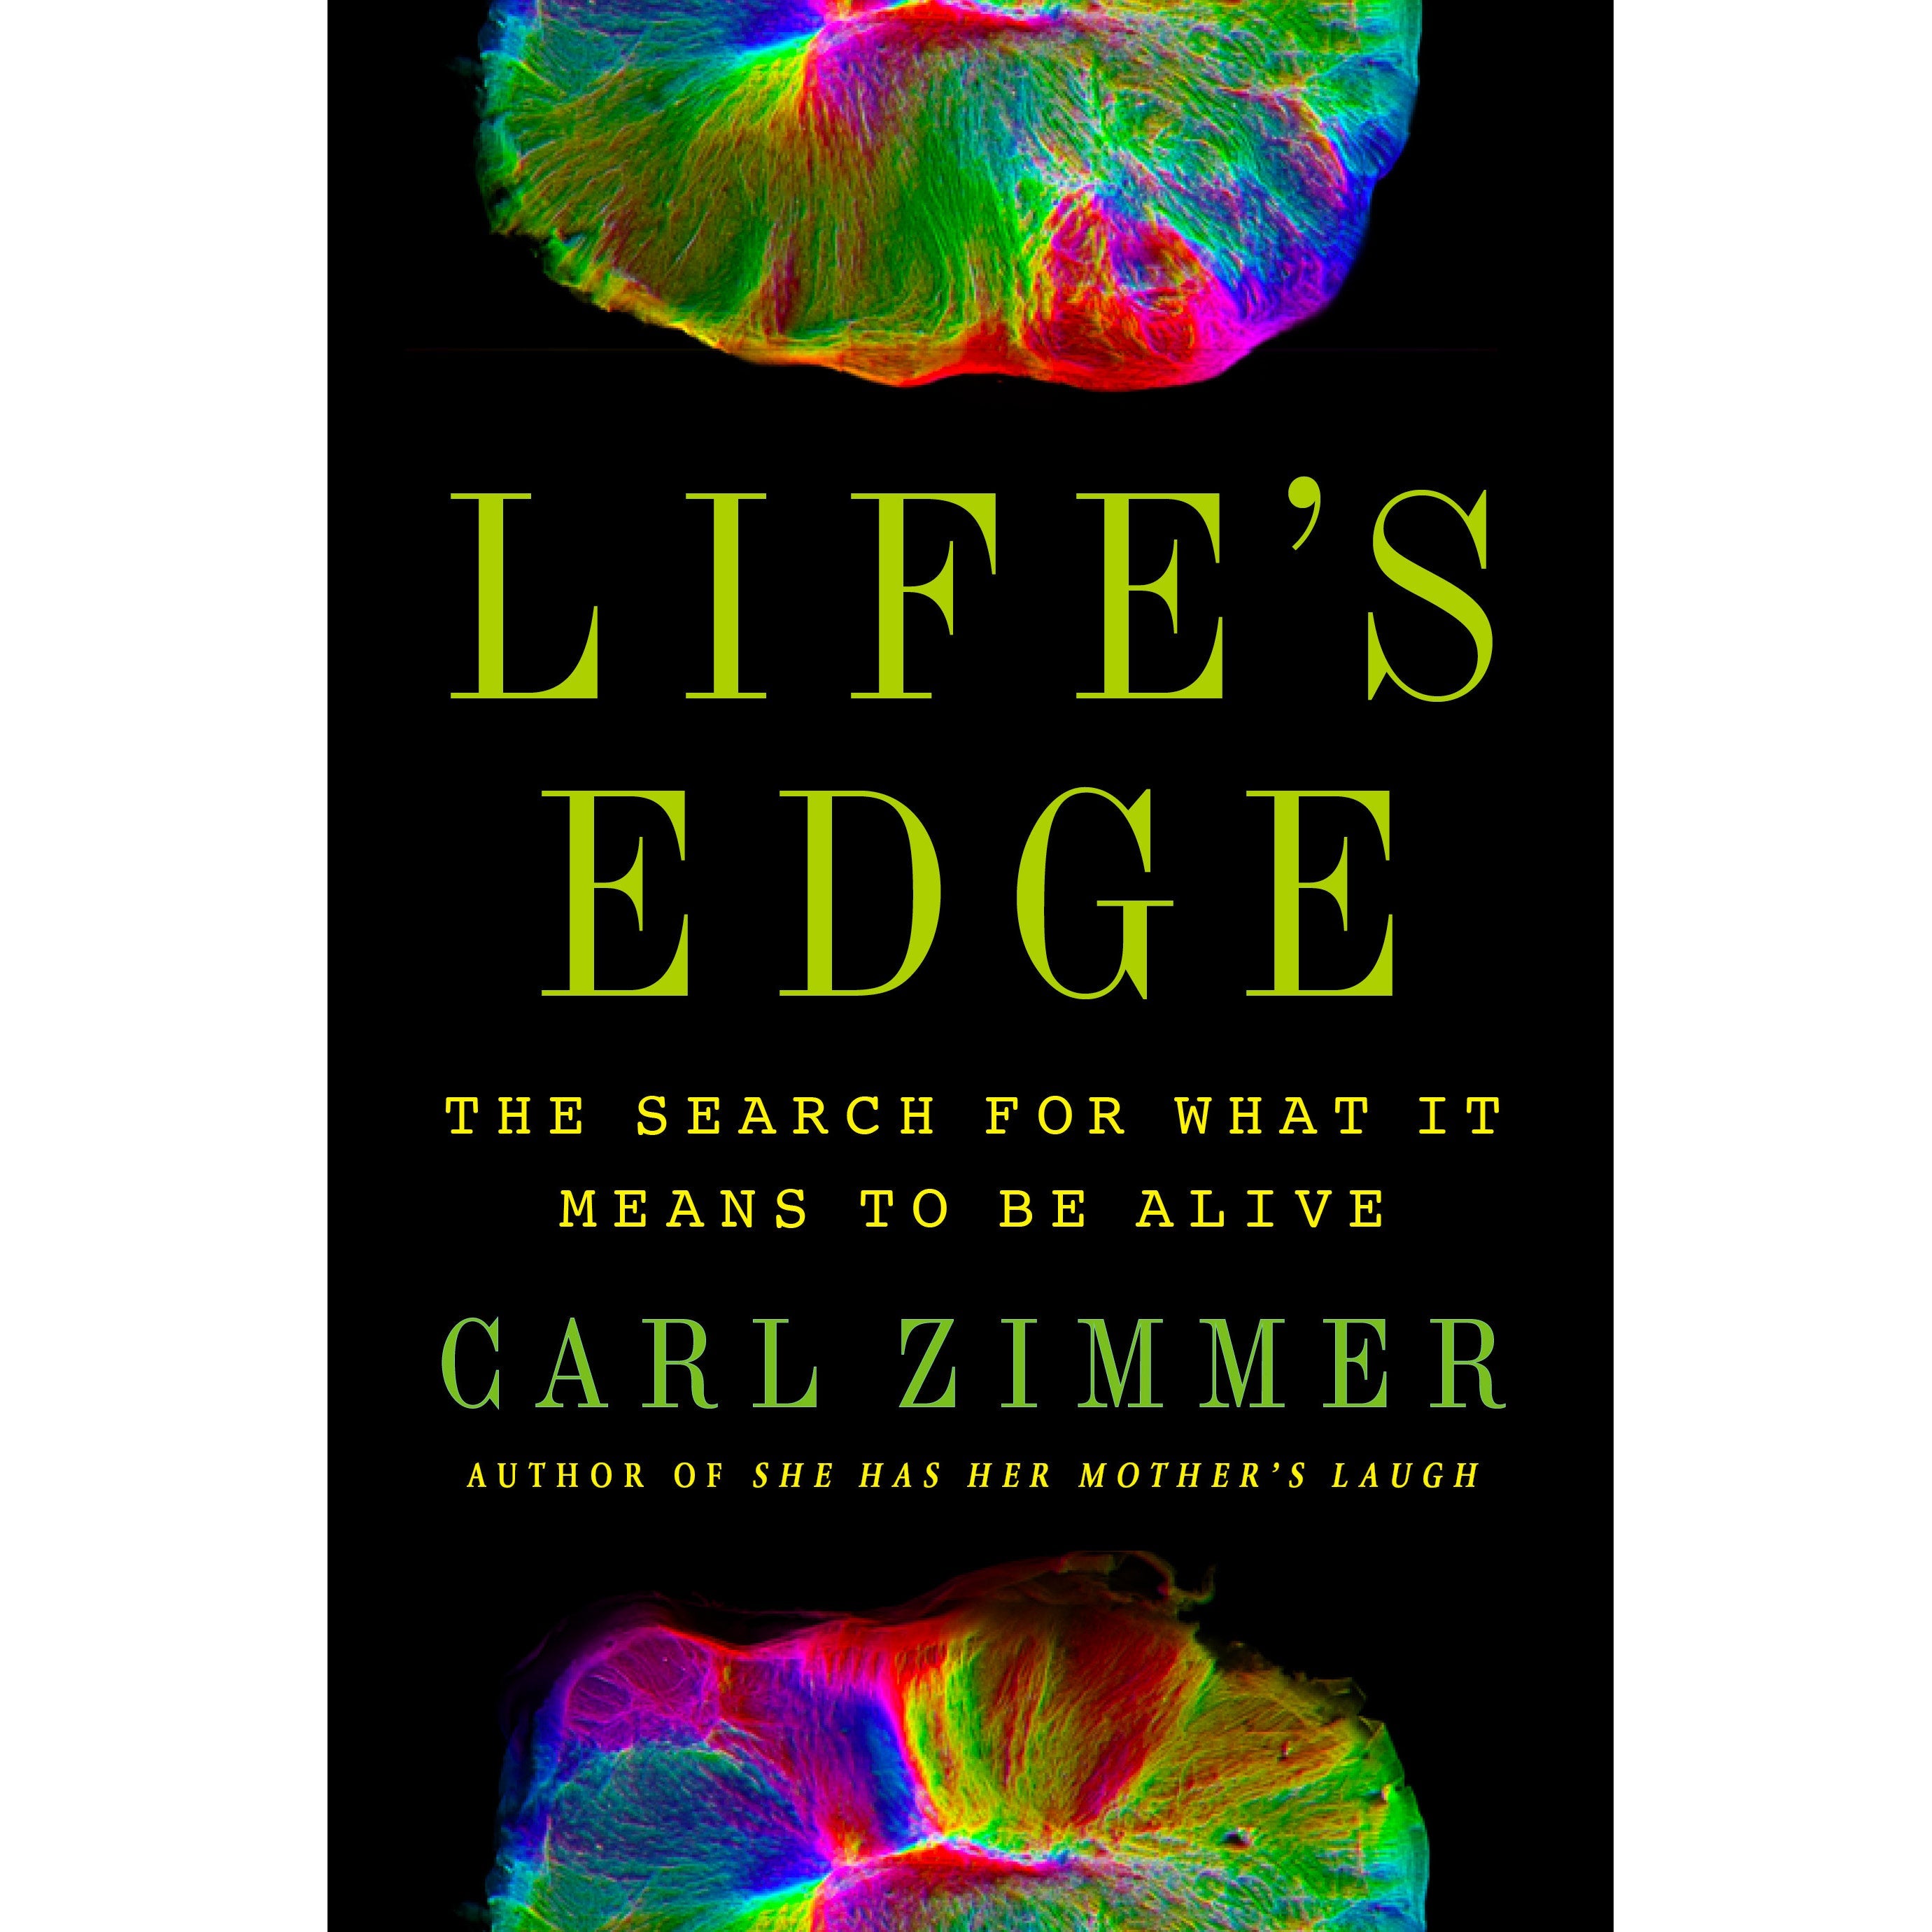 The cover of Life's Edge by Carl Zimmer shows multicolored blobs.